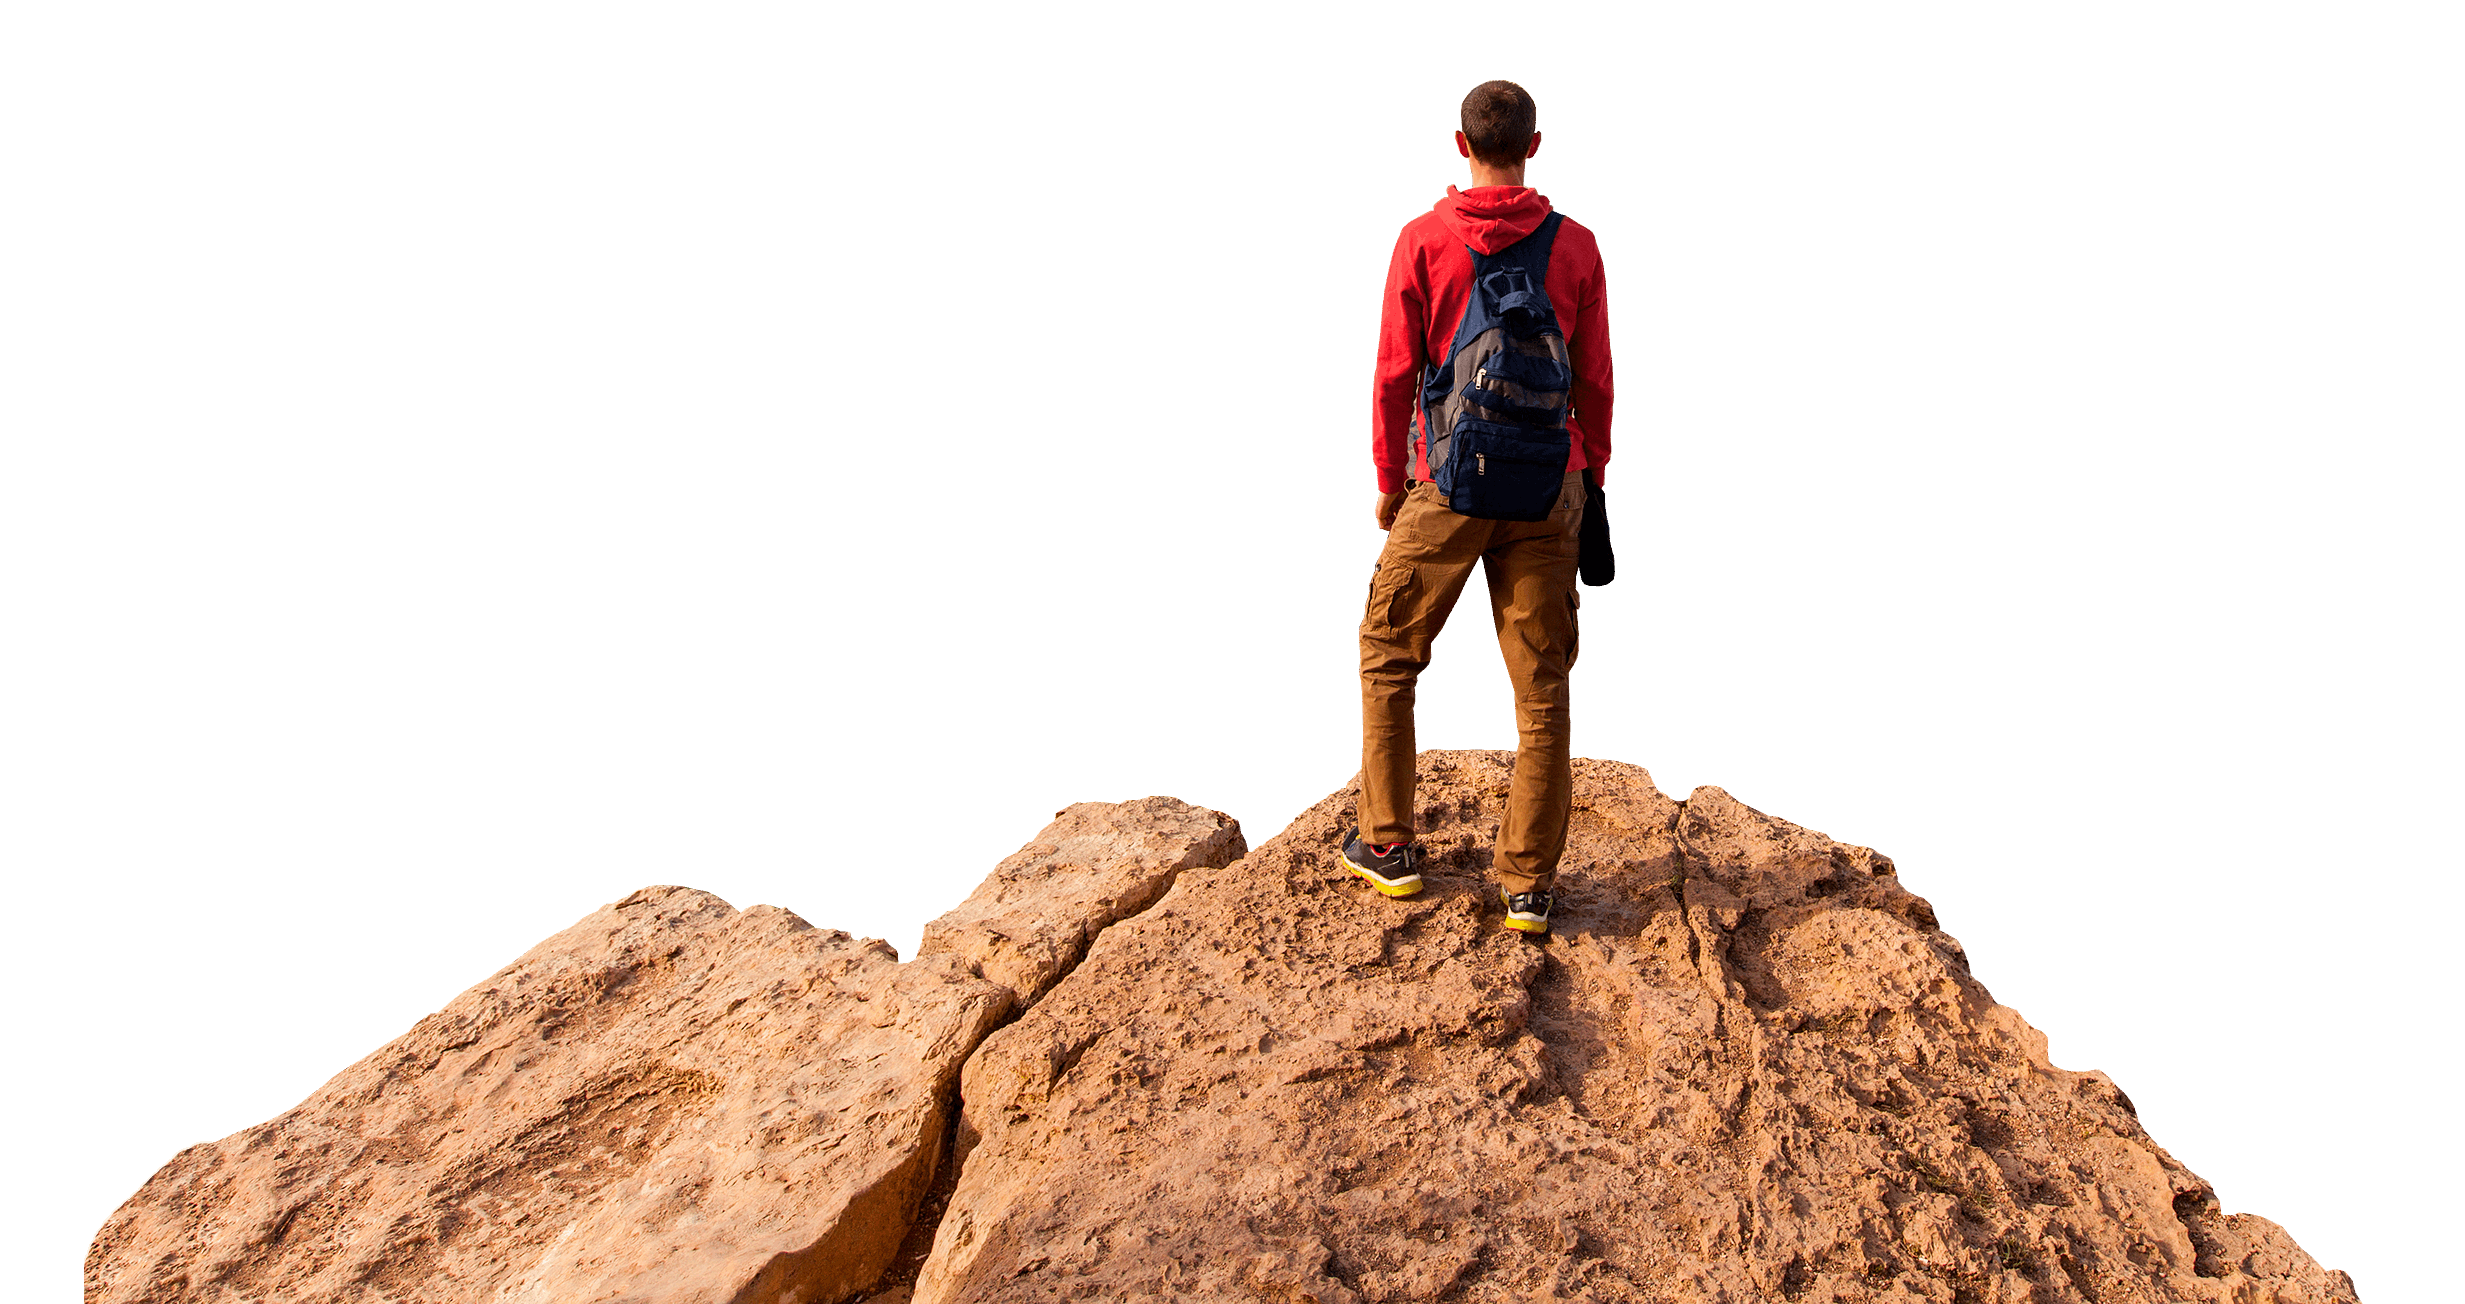 Boy with rucksack standing on a rock looking out